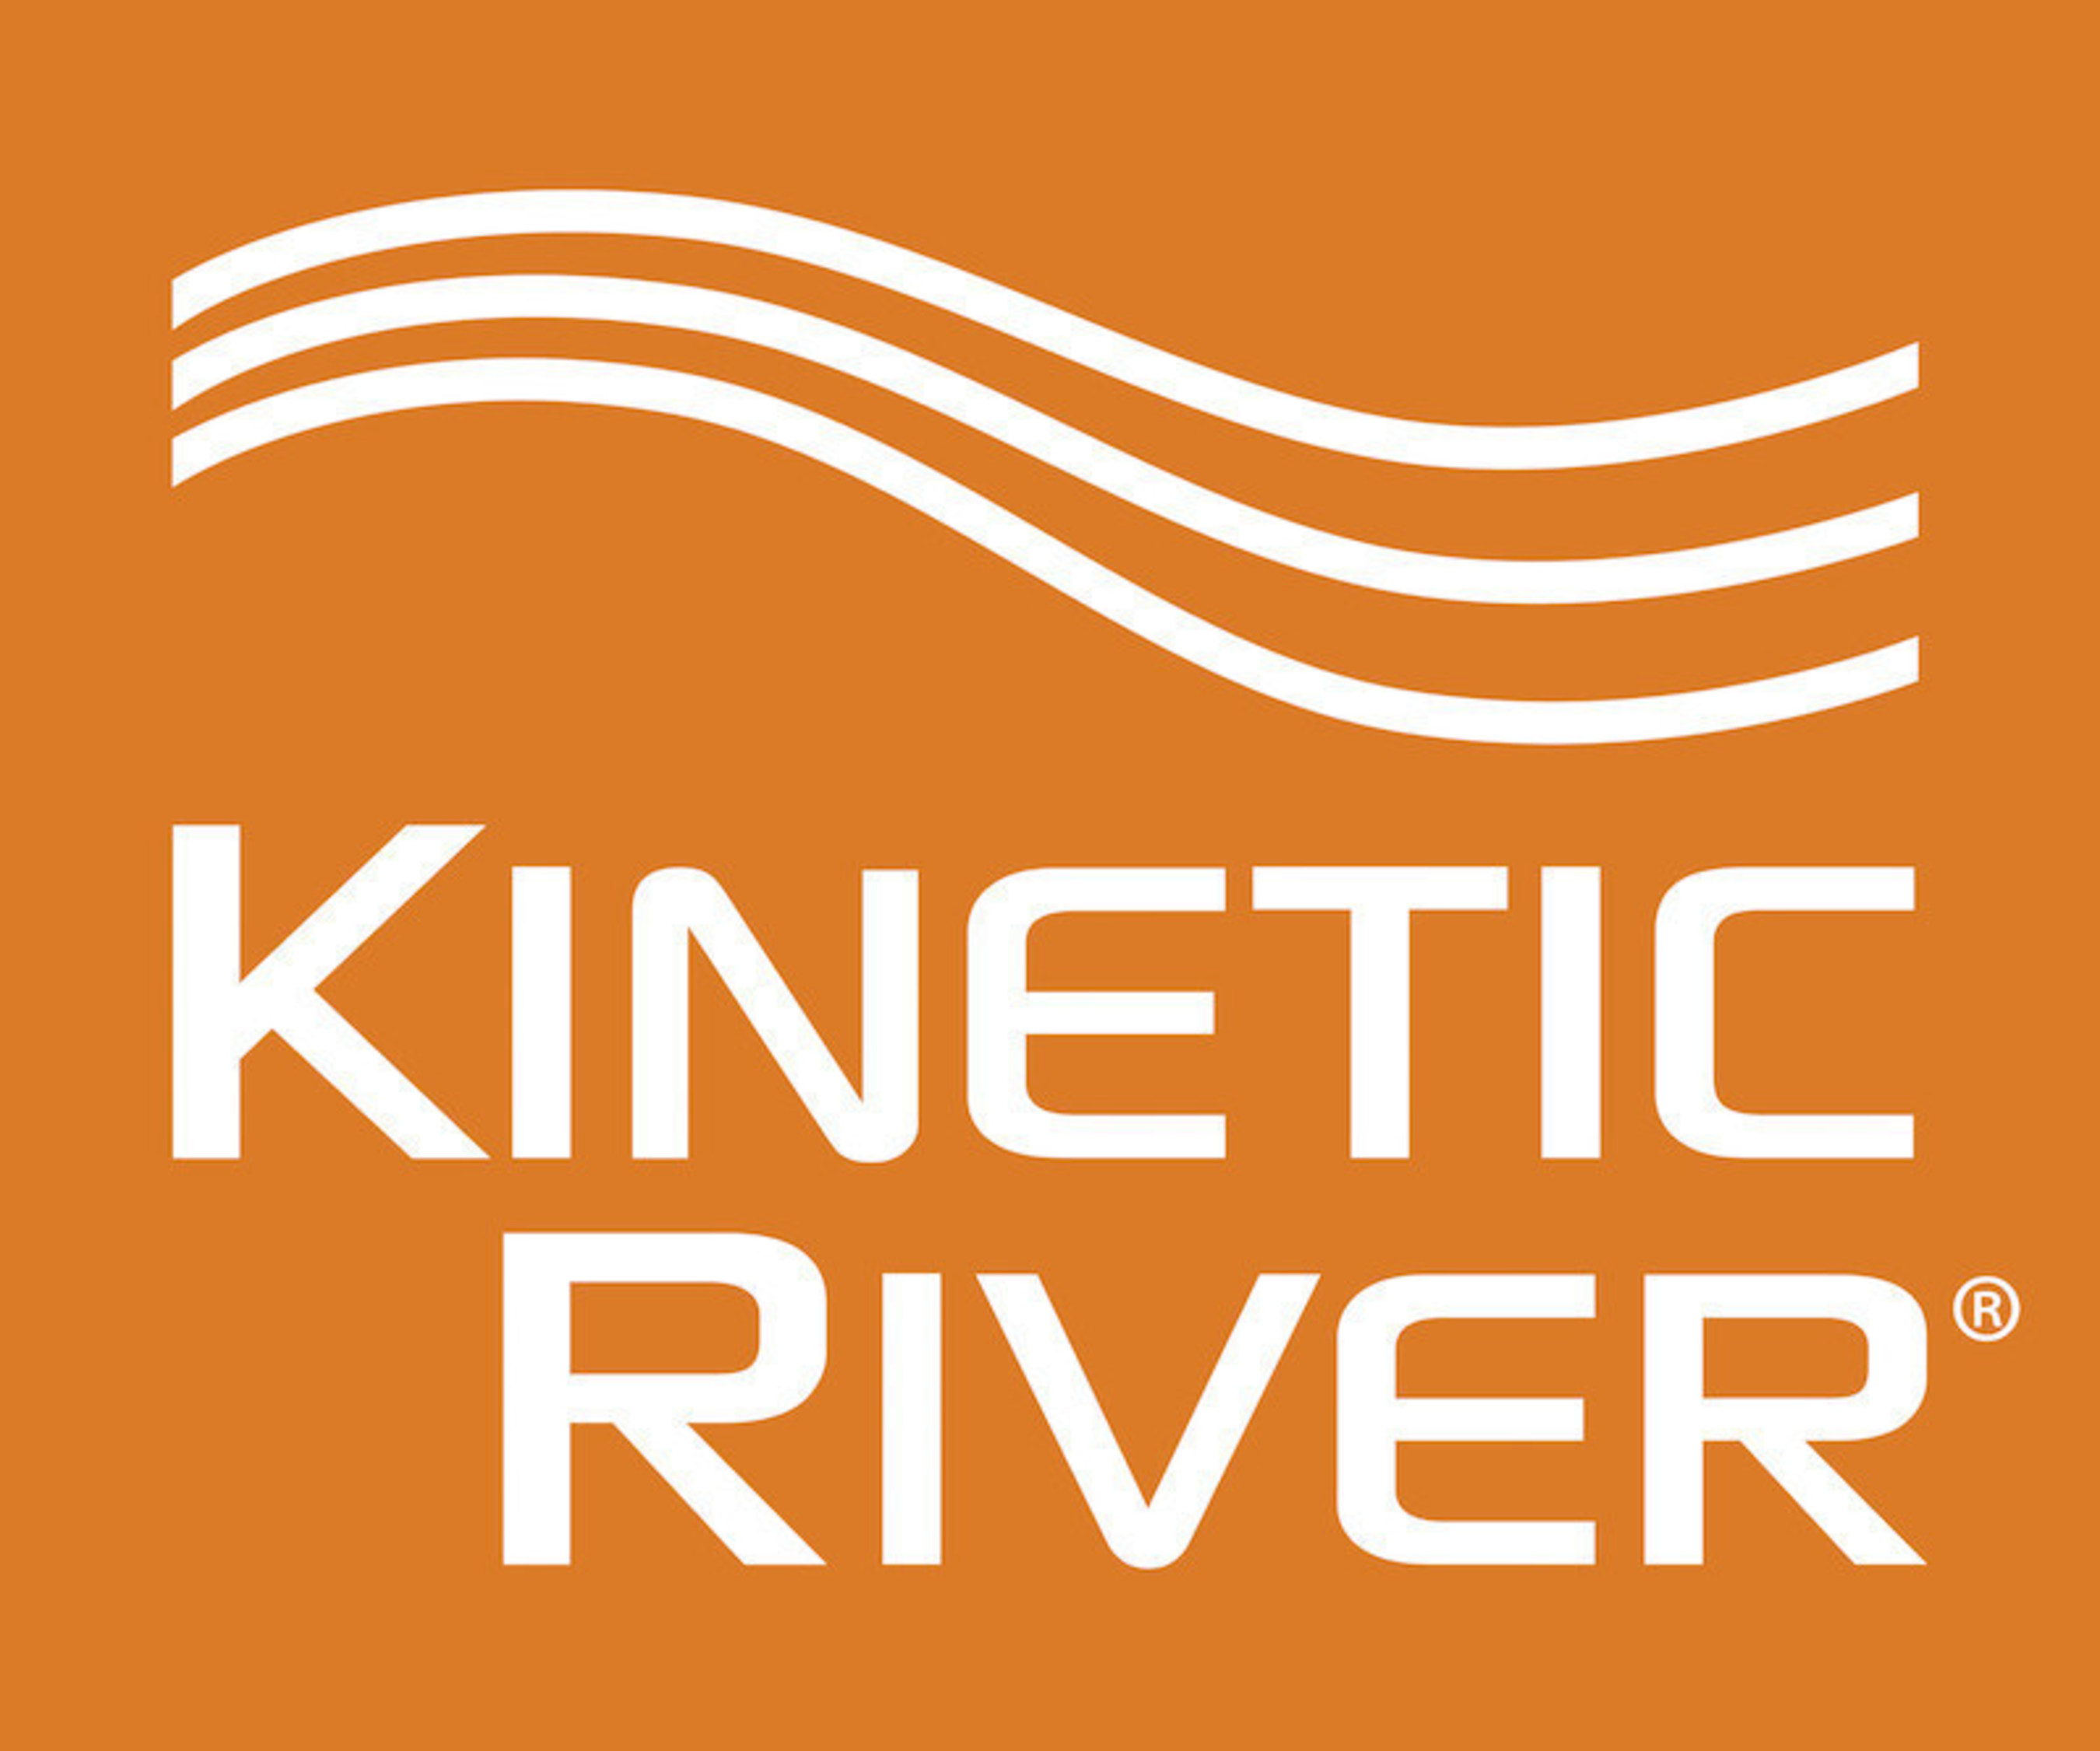 Kinetic River offers custom cell analyzers, such as the Potomac modular flow cytometer and the Danube fluorescence lifetime flow cytometer. Consulting services available from Kinetic River include design reviews, technical due diligence, expert witnessing, design and prototyping.